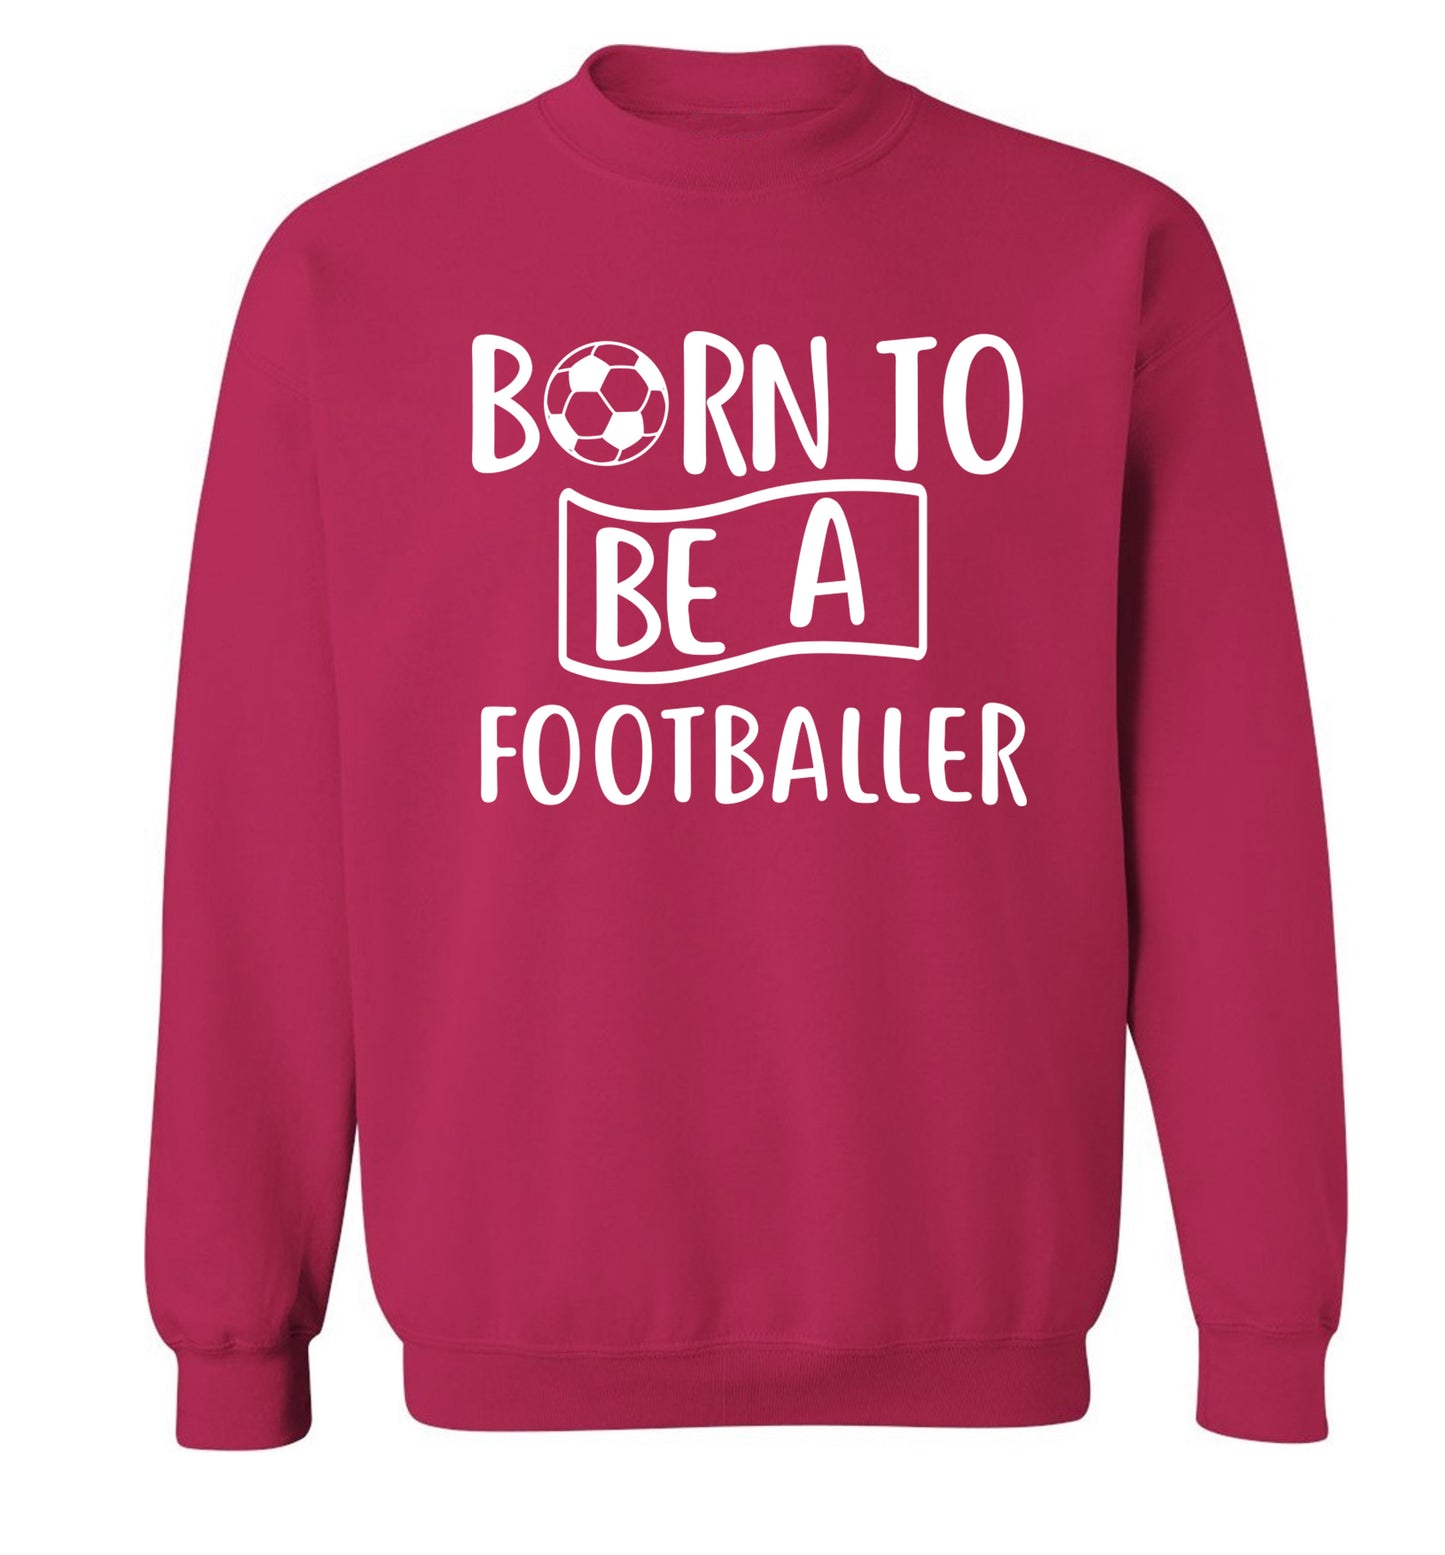 Born to be a footballer Adult's unisexpink Sweater 2XL